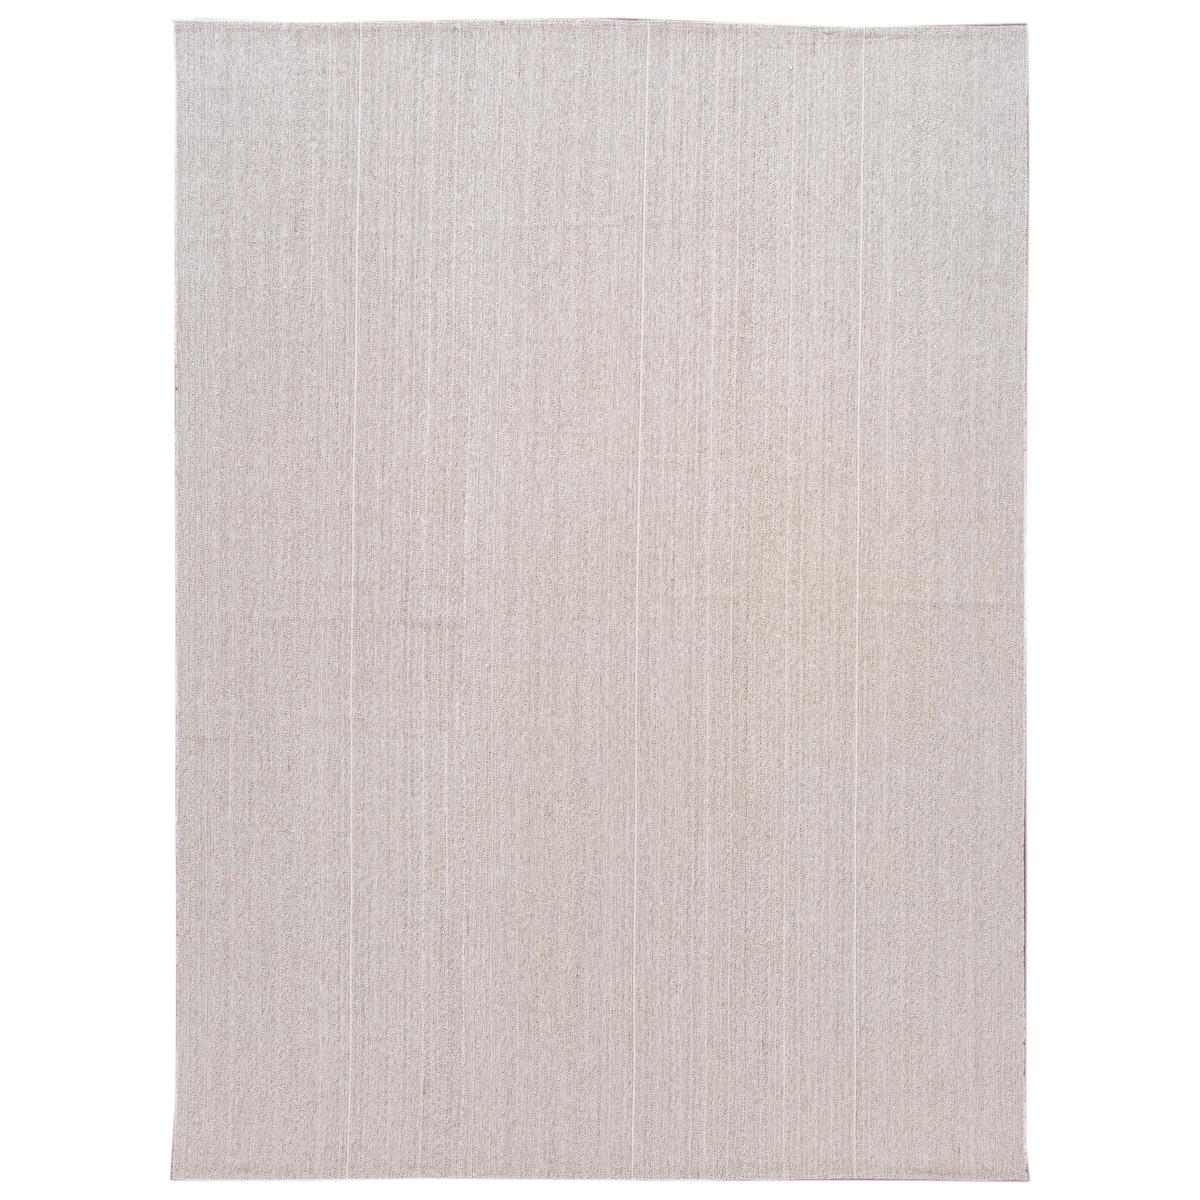 21st Century Contemporary Flat-Weave Wool Rug